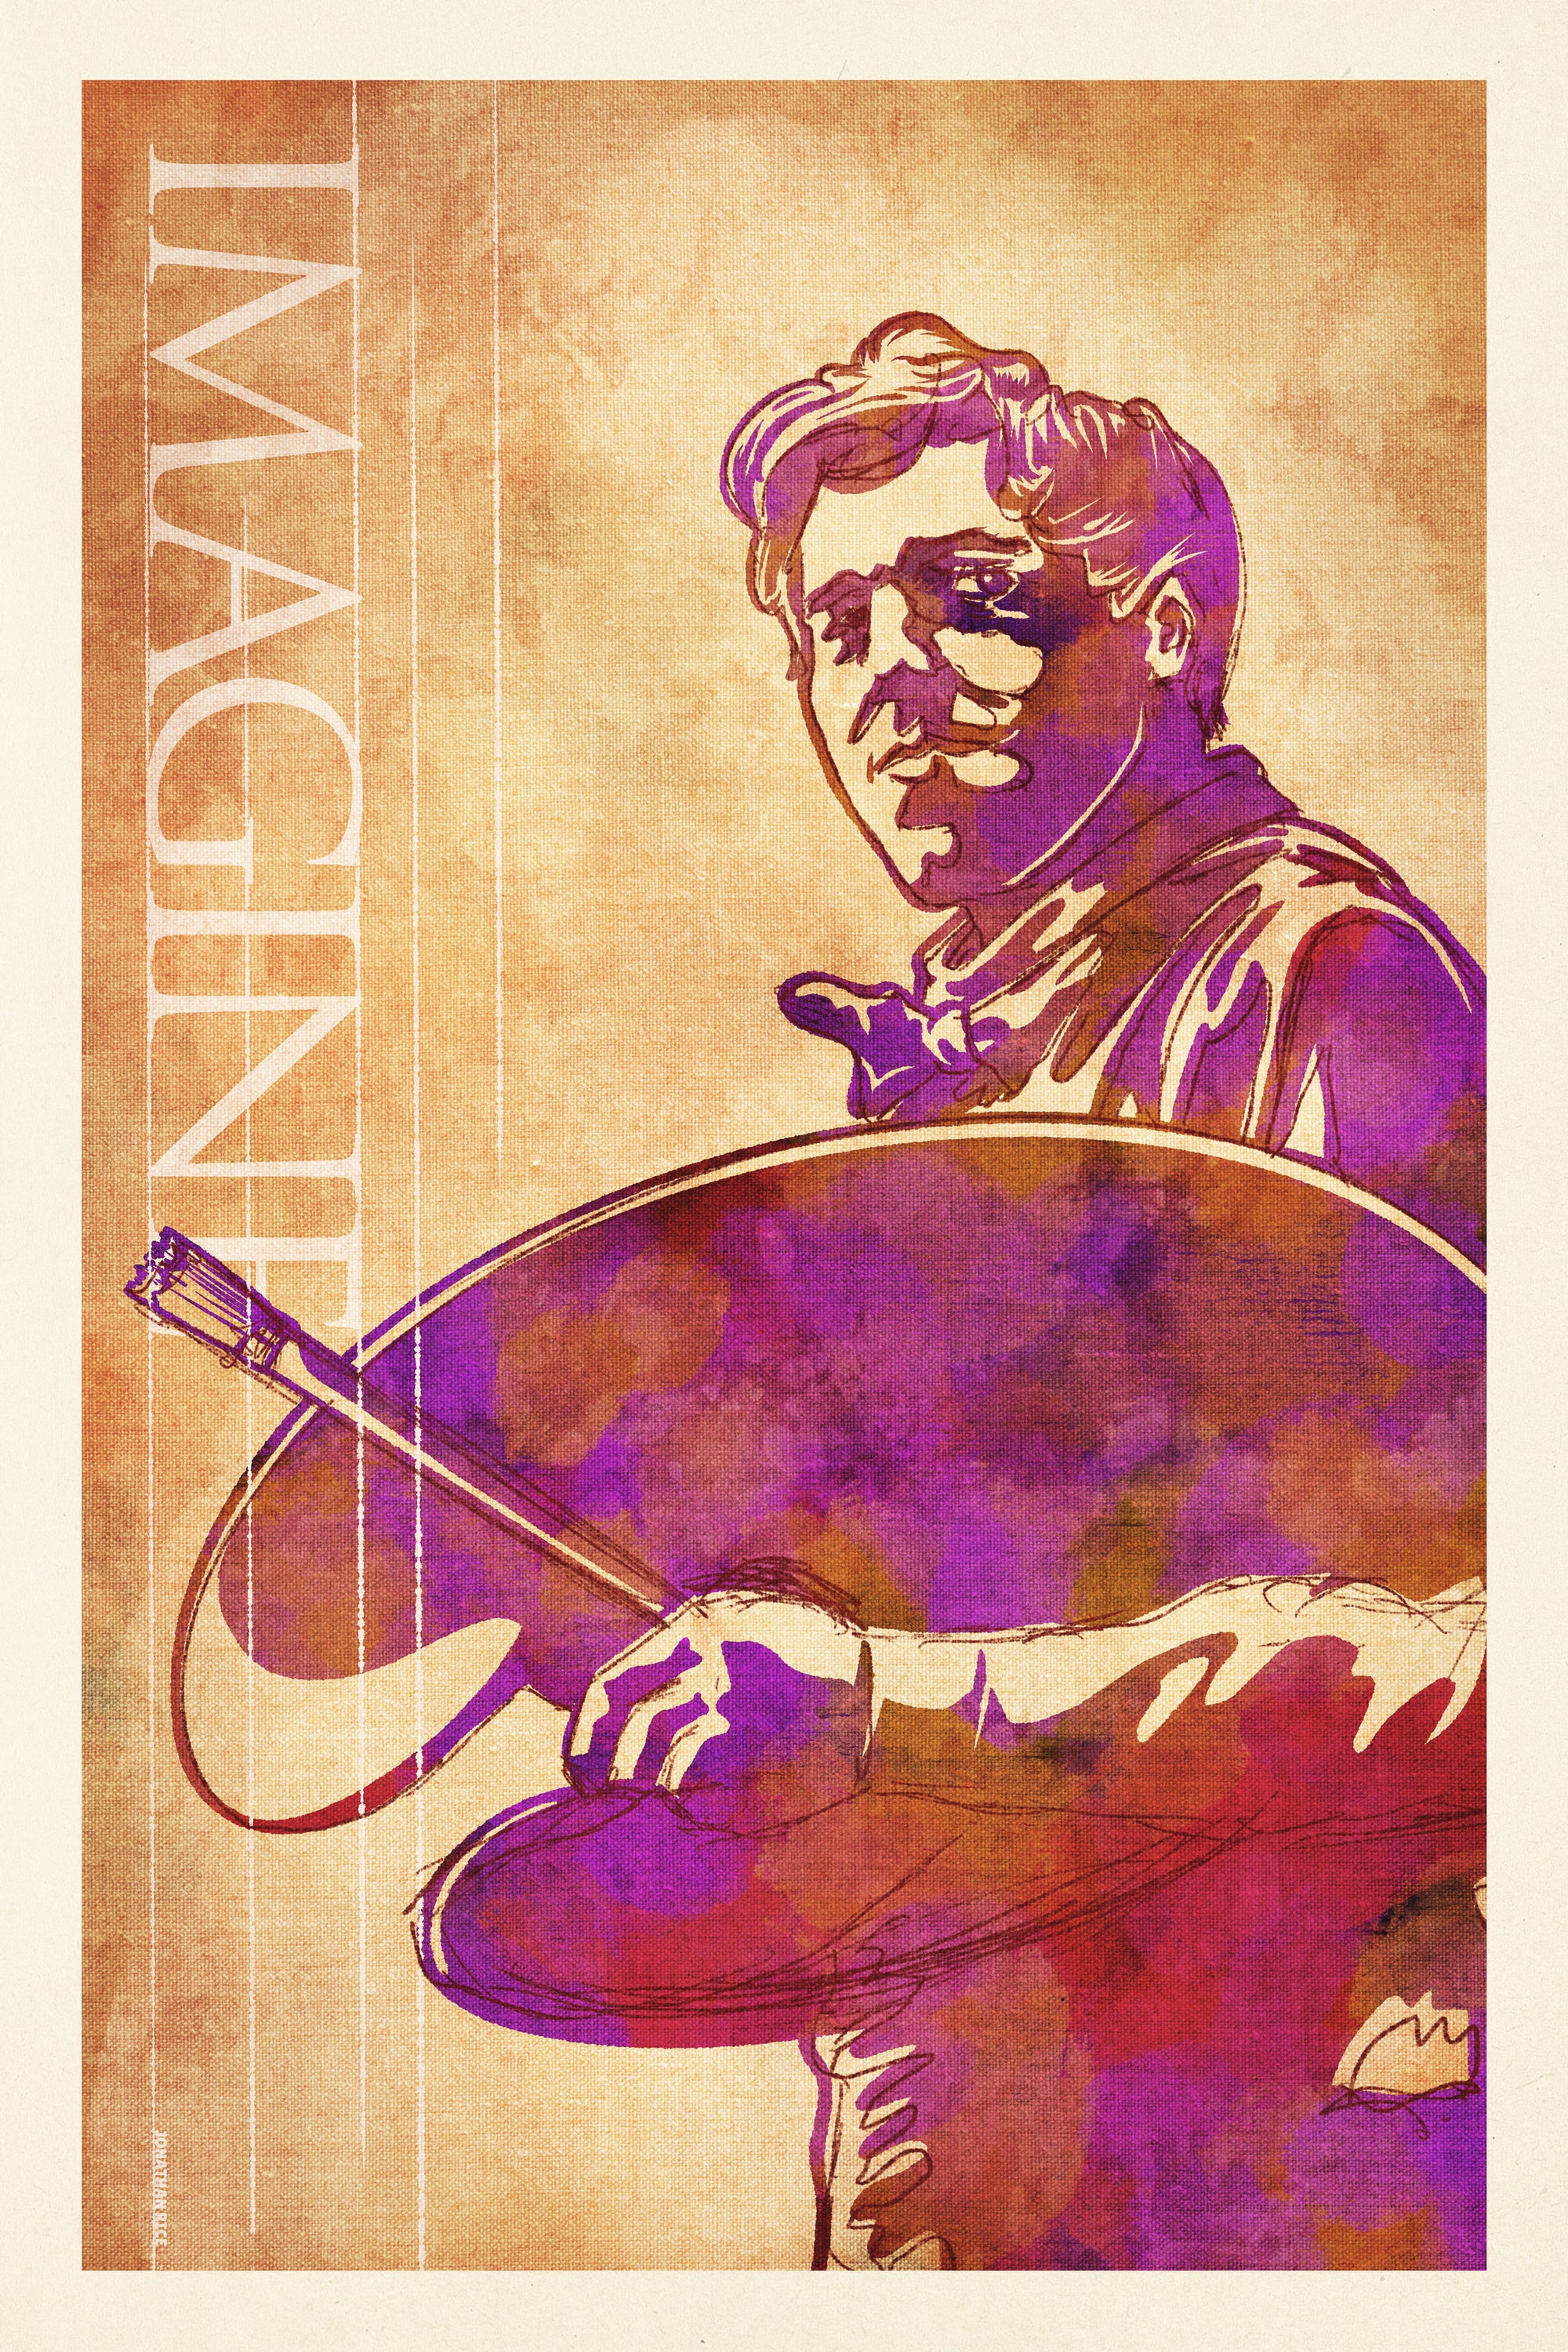 Portrait of N.C. Wyeth holding his artist palette and brush and the word “IMAGINE”. The poster shows Wyeth depicted with strong colors and simple shapes with a painterly background.